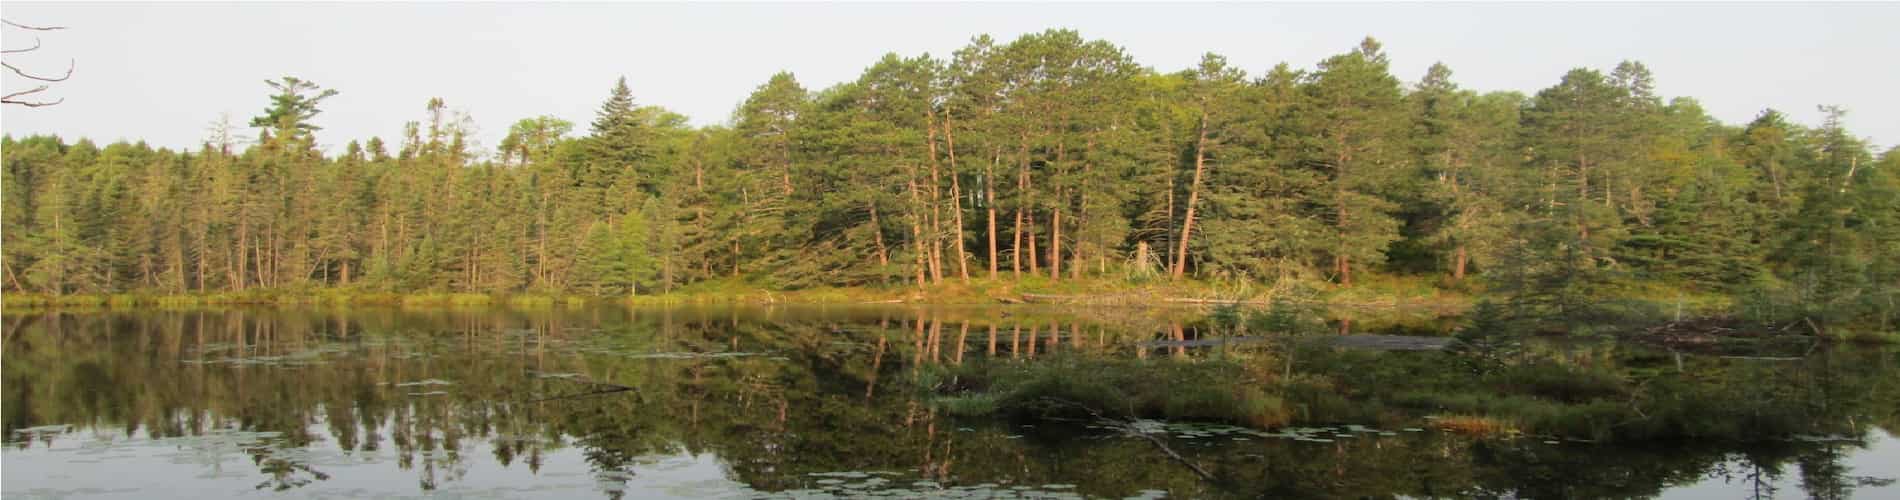 Spring-shoreline-with-pines-reflecting-off-lake